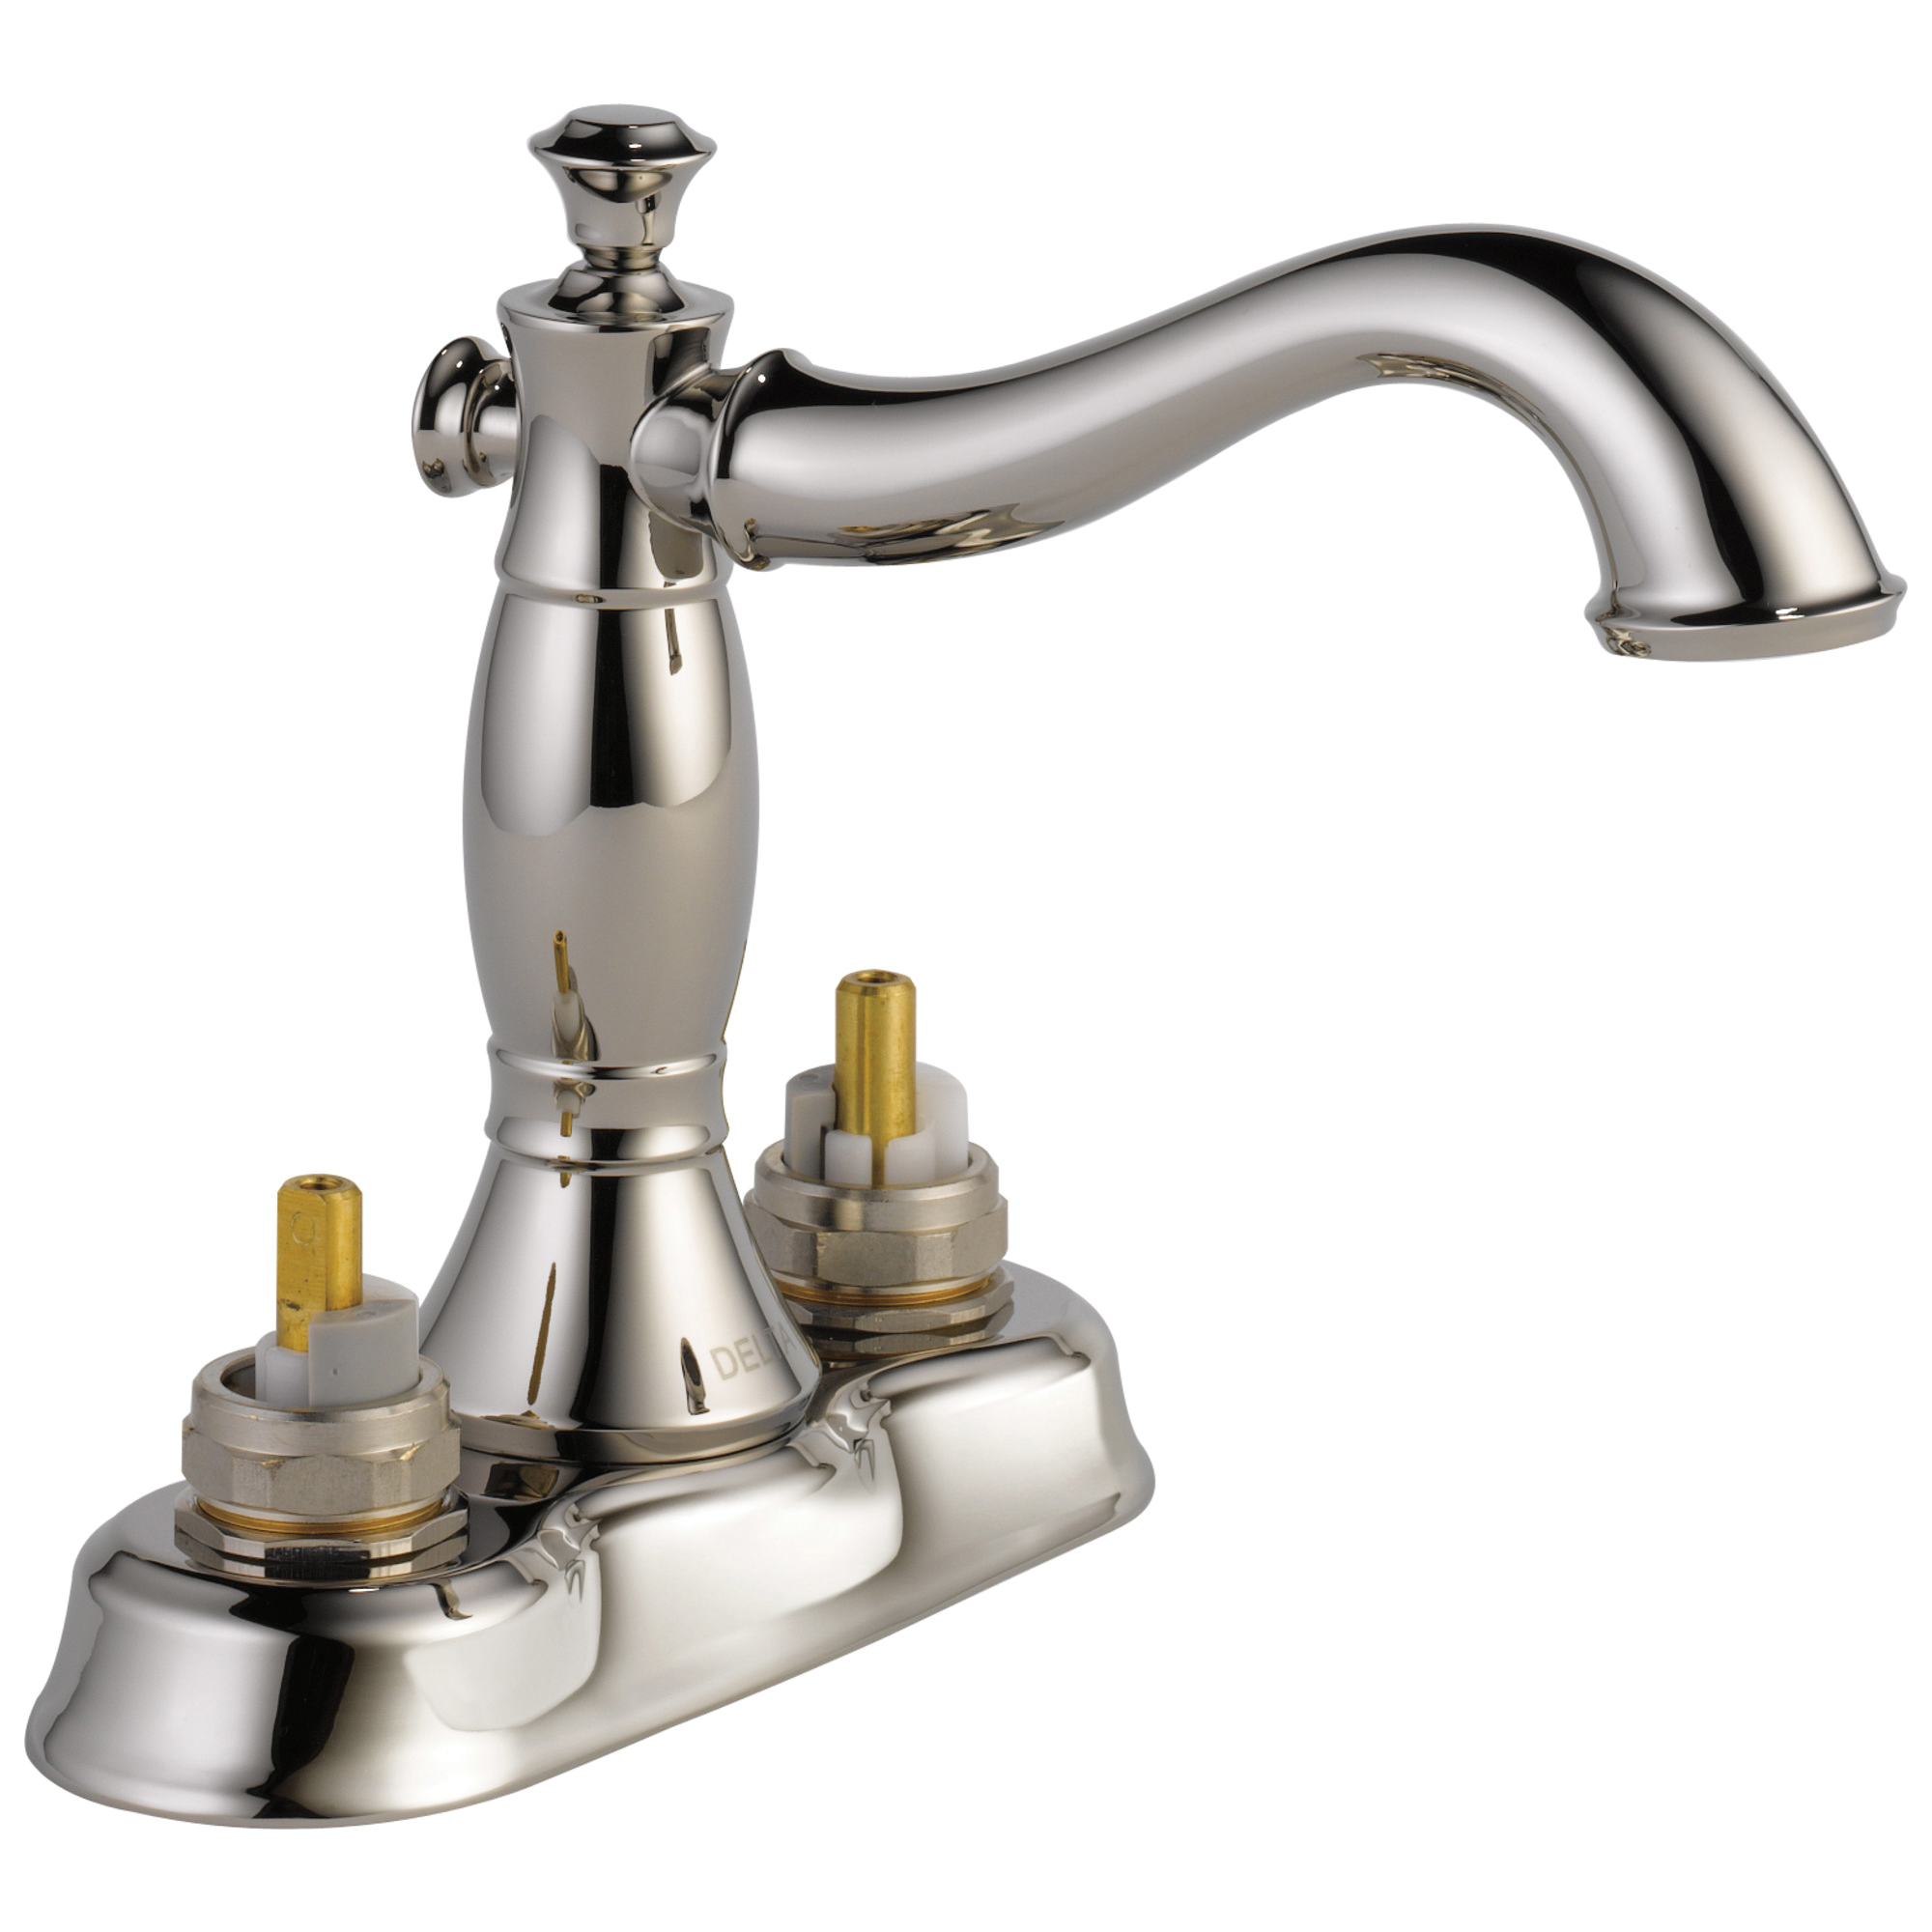 DELTA® 2597LF-PNMPU-LHP Centerset Lavatory Faucet, Cassidy™, Polished Nickel, Pop-Up Drain, 1.2 gpm - Discontinued